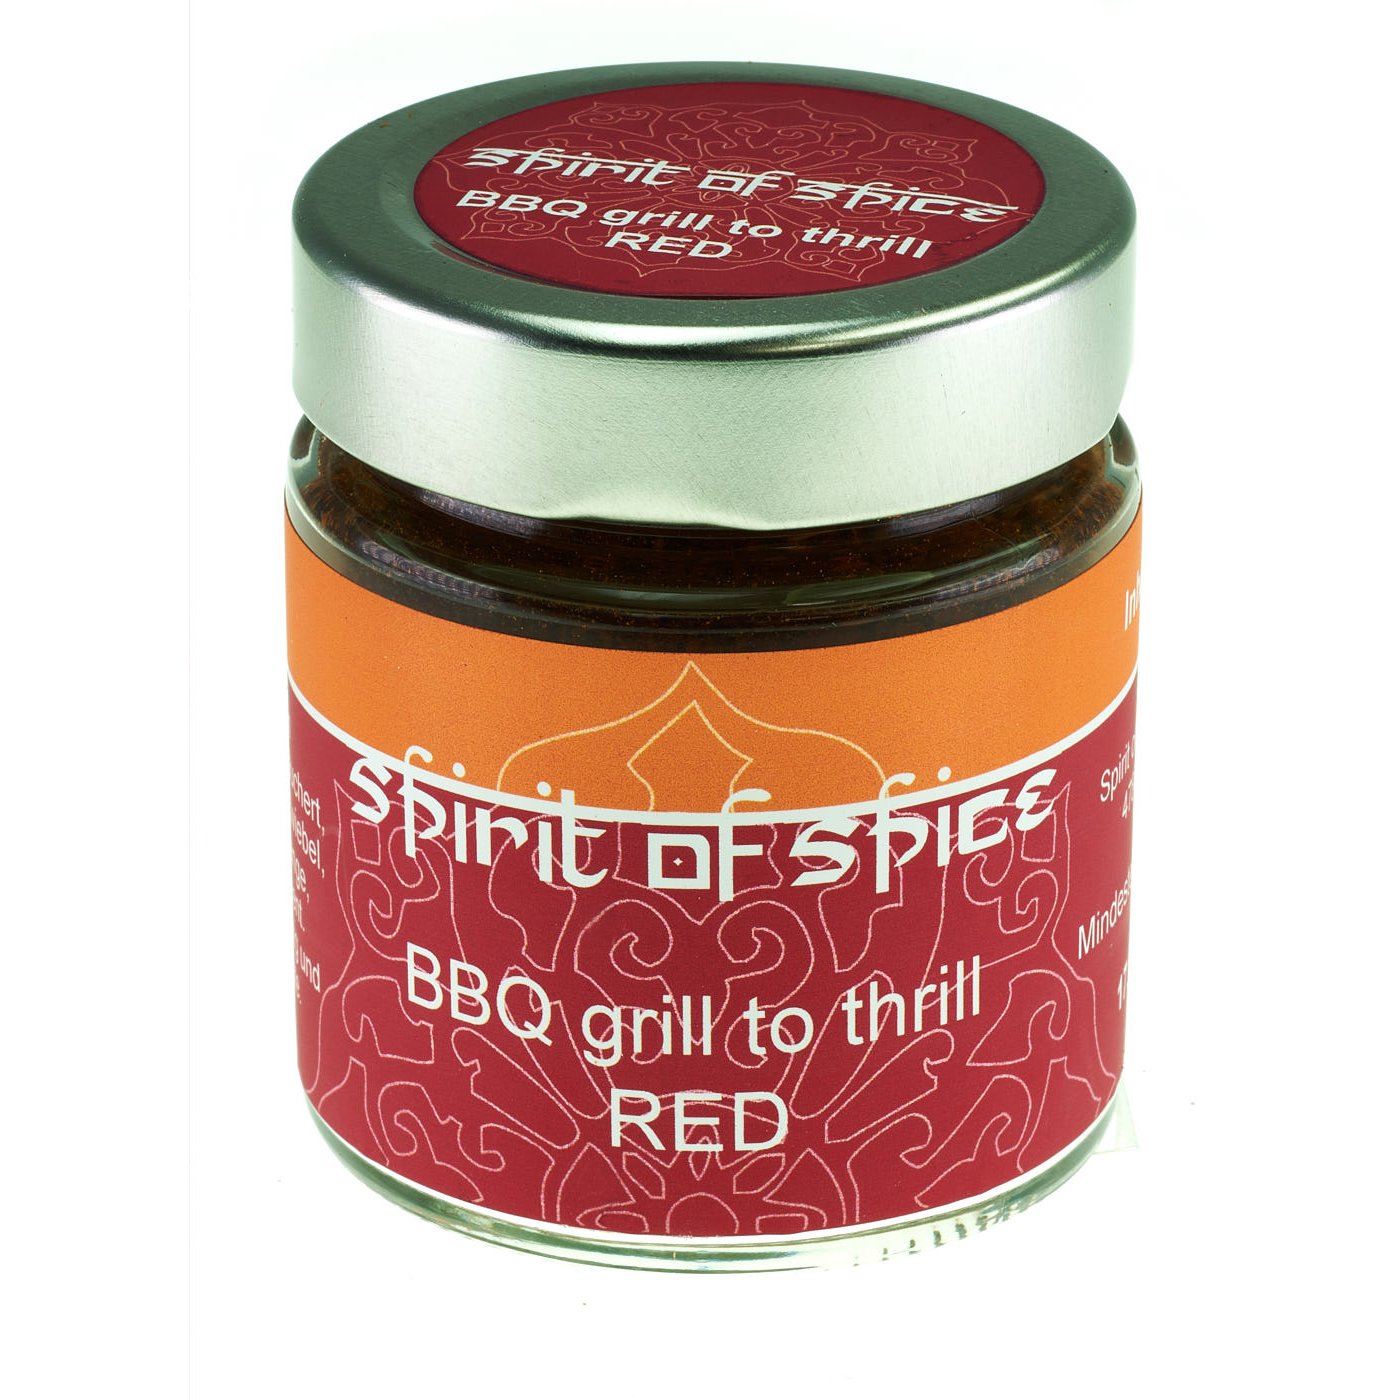 BBQ Grill to thrill Red, Glas, 60 g